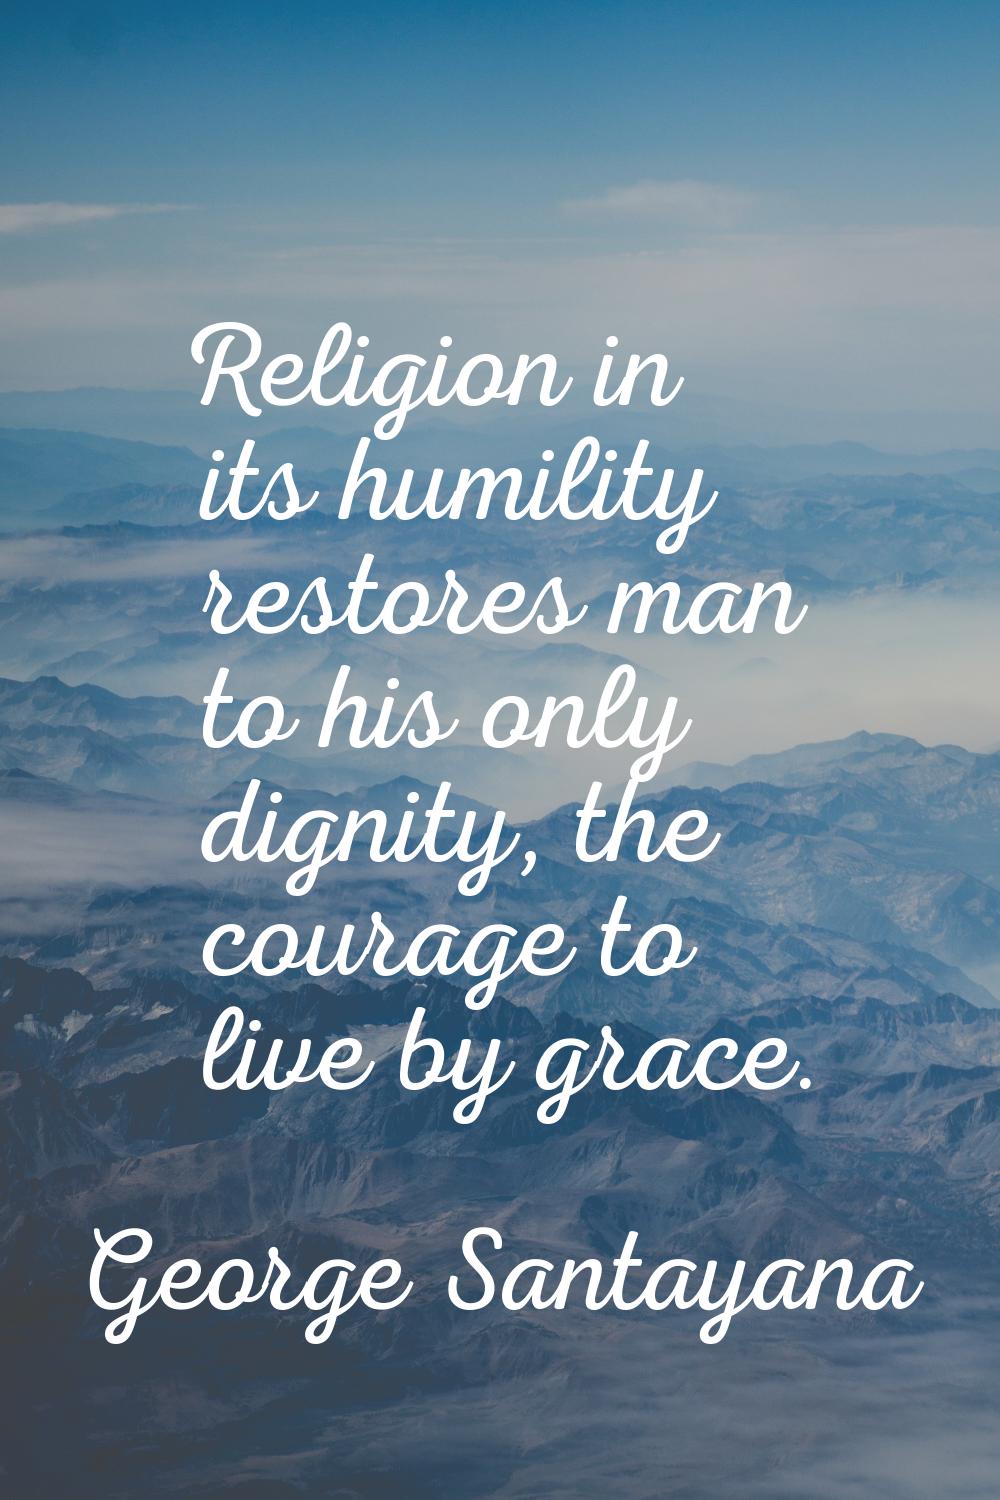 Religion in its humility restores man to his only dignity, the courage to live by grace.